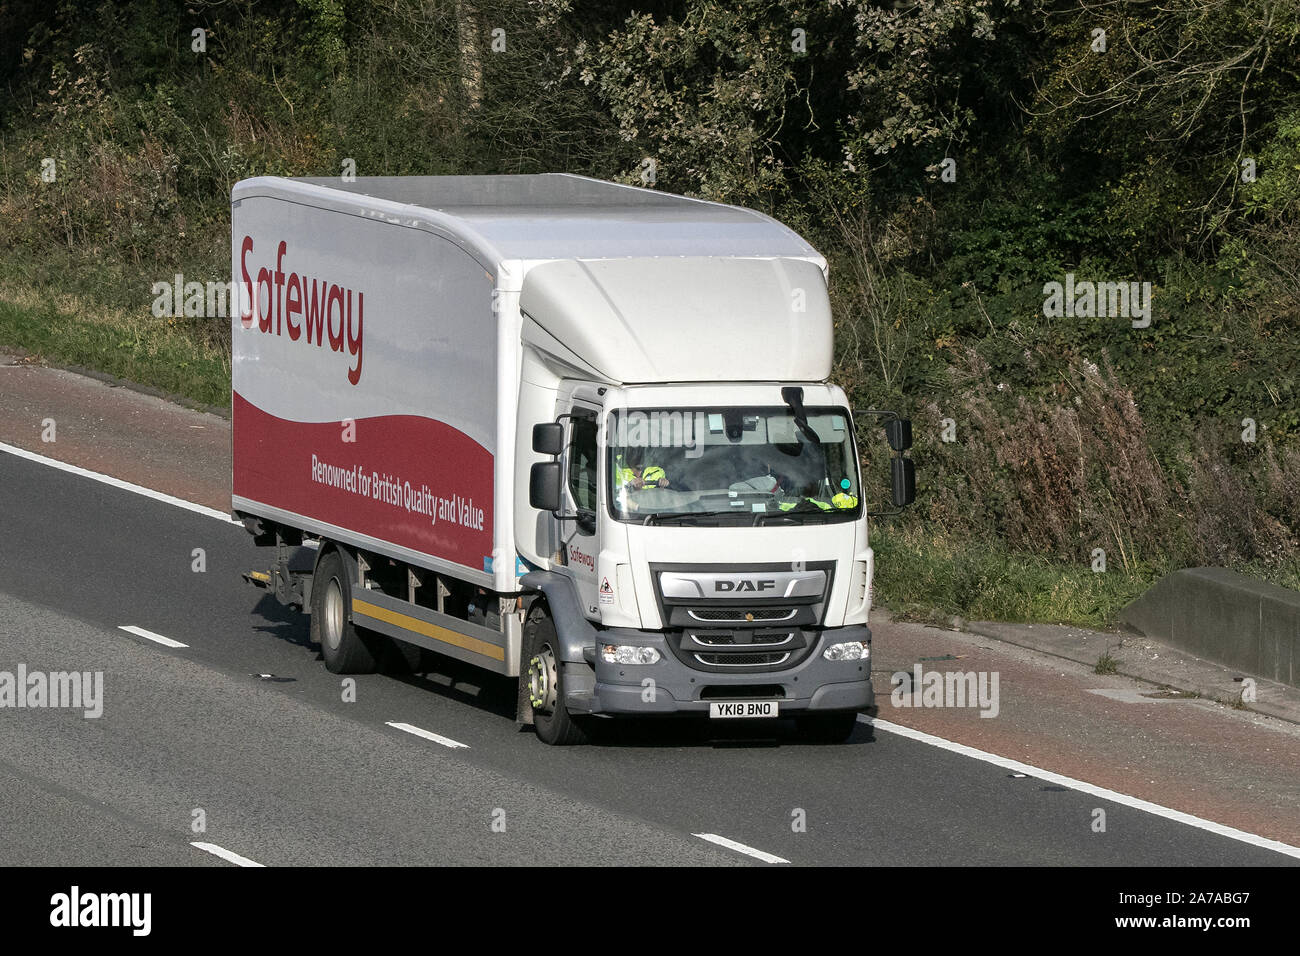 A Safeway supermarket groceries delivery daf truck Stock Photo